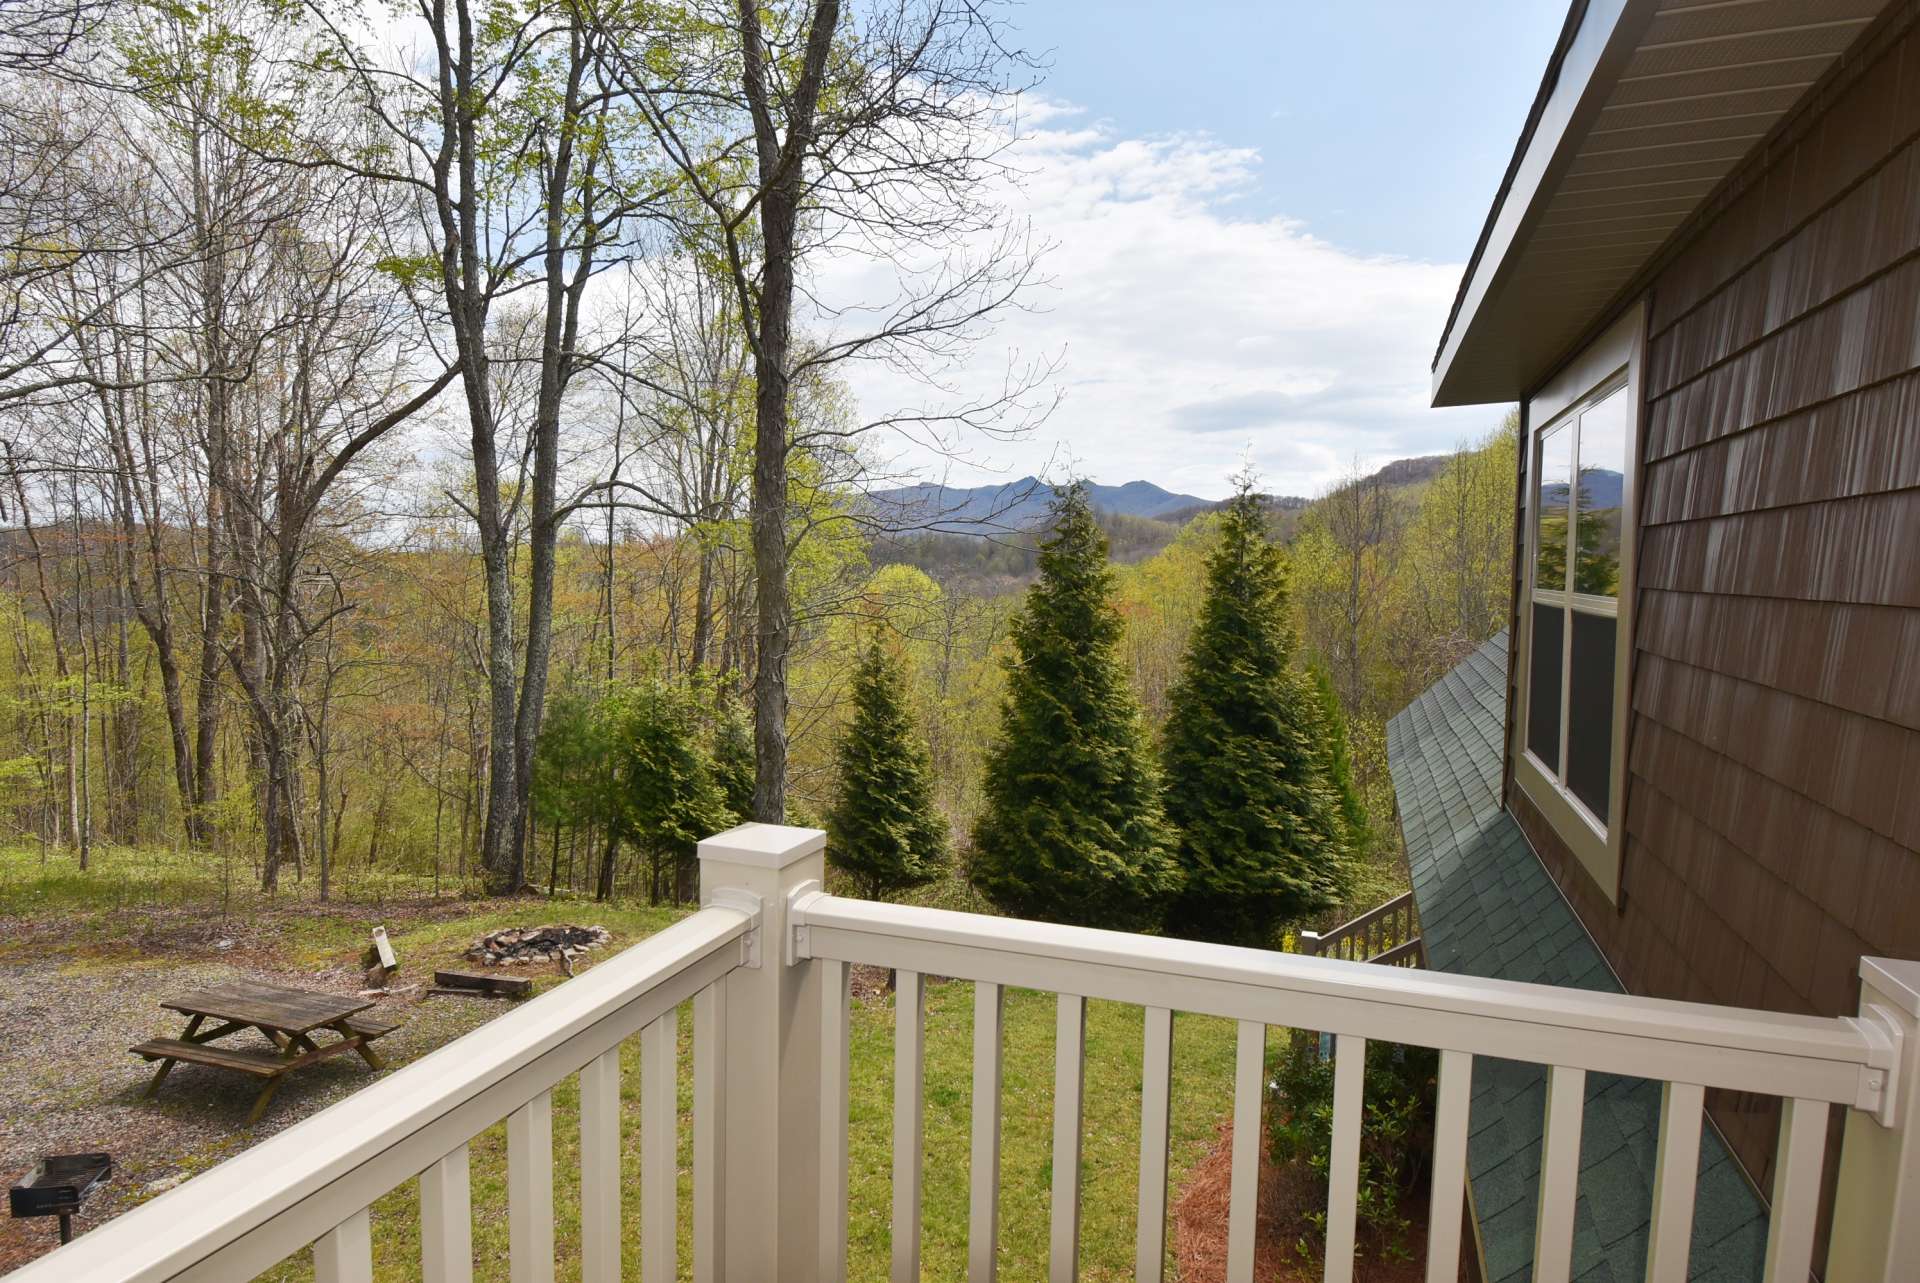 You will love having the morning's first cup of coffee on the master suite balcony with the views, fresh mountain air, and the sounds of nature all around you.  Or, relax with your favorite beverage at the end of the day and enjoy a blanket of stars above you.